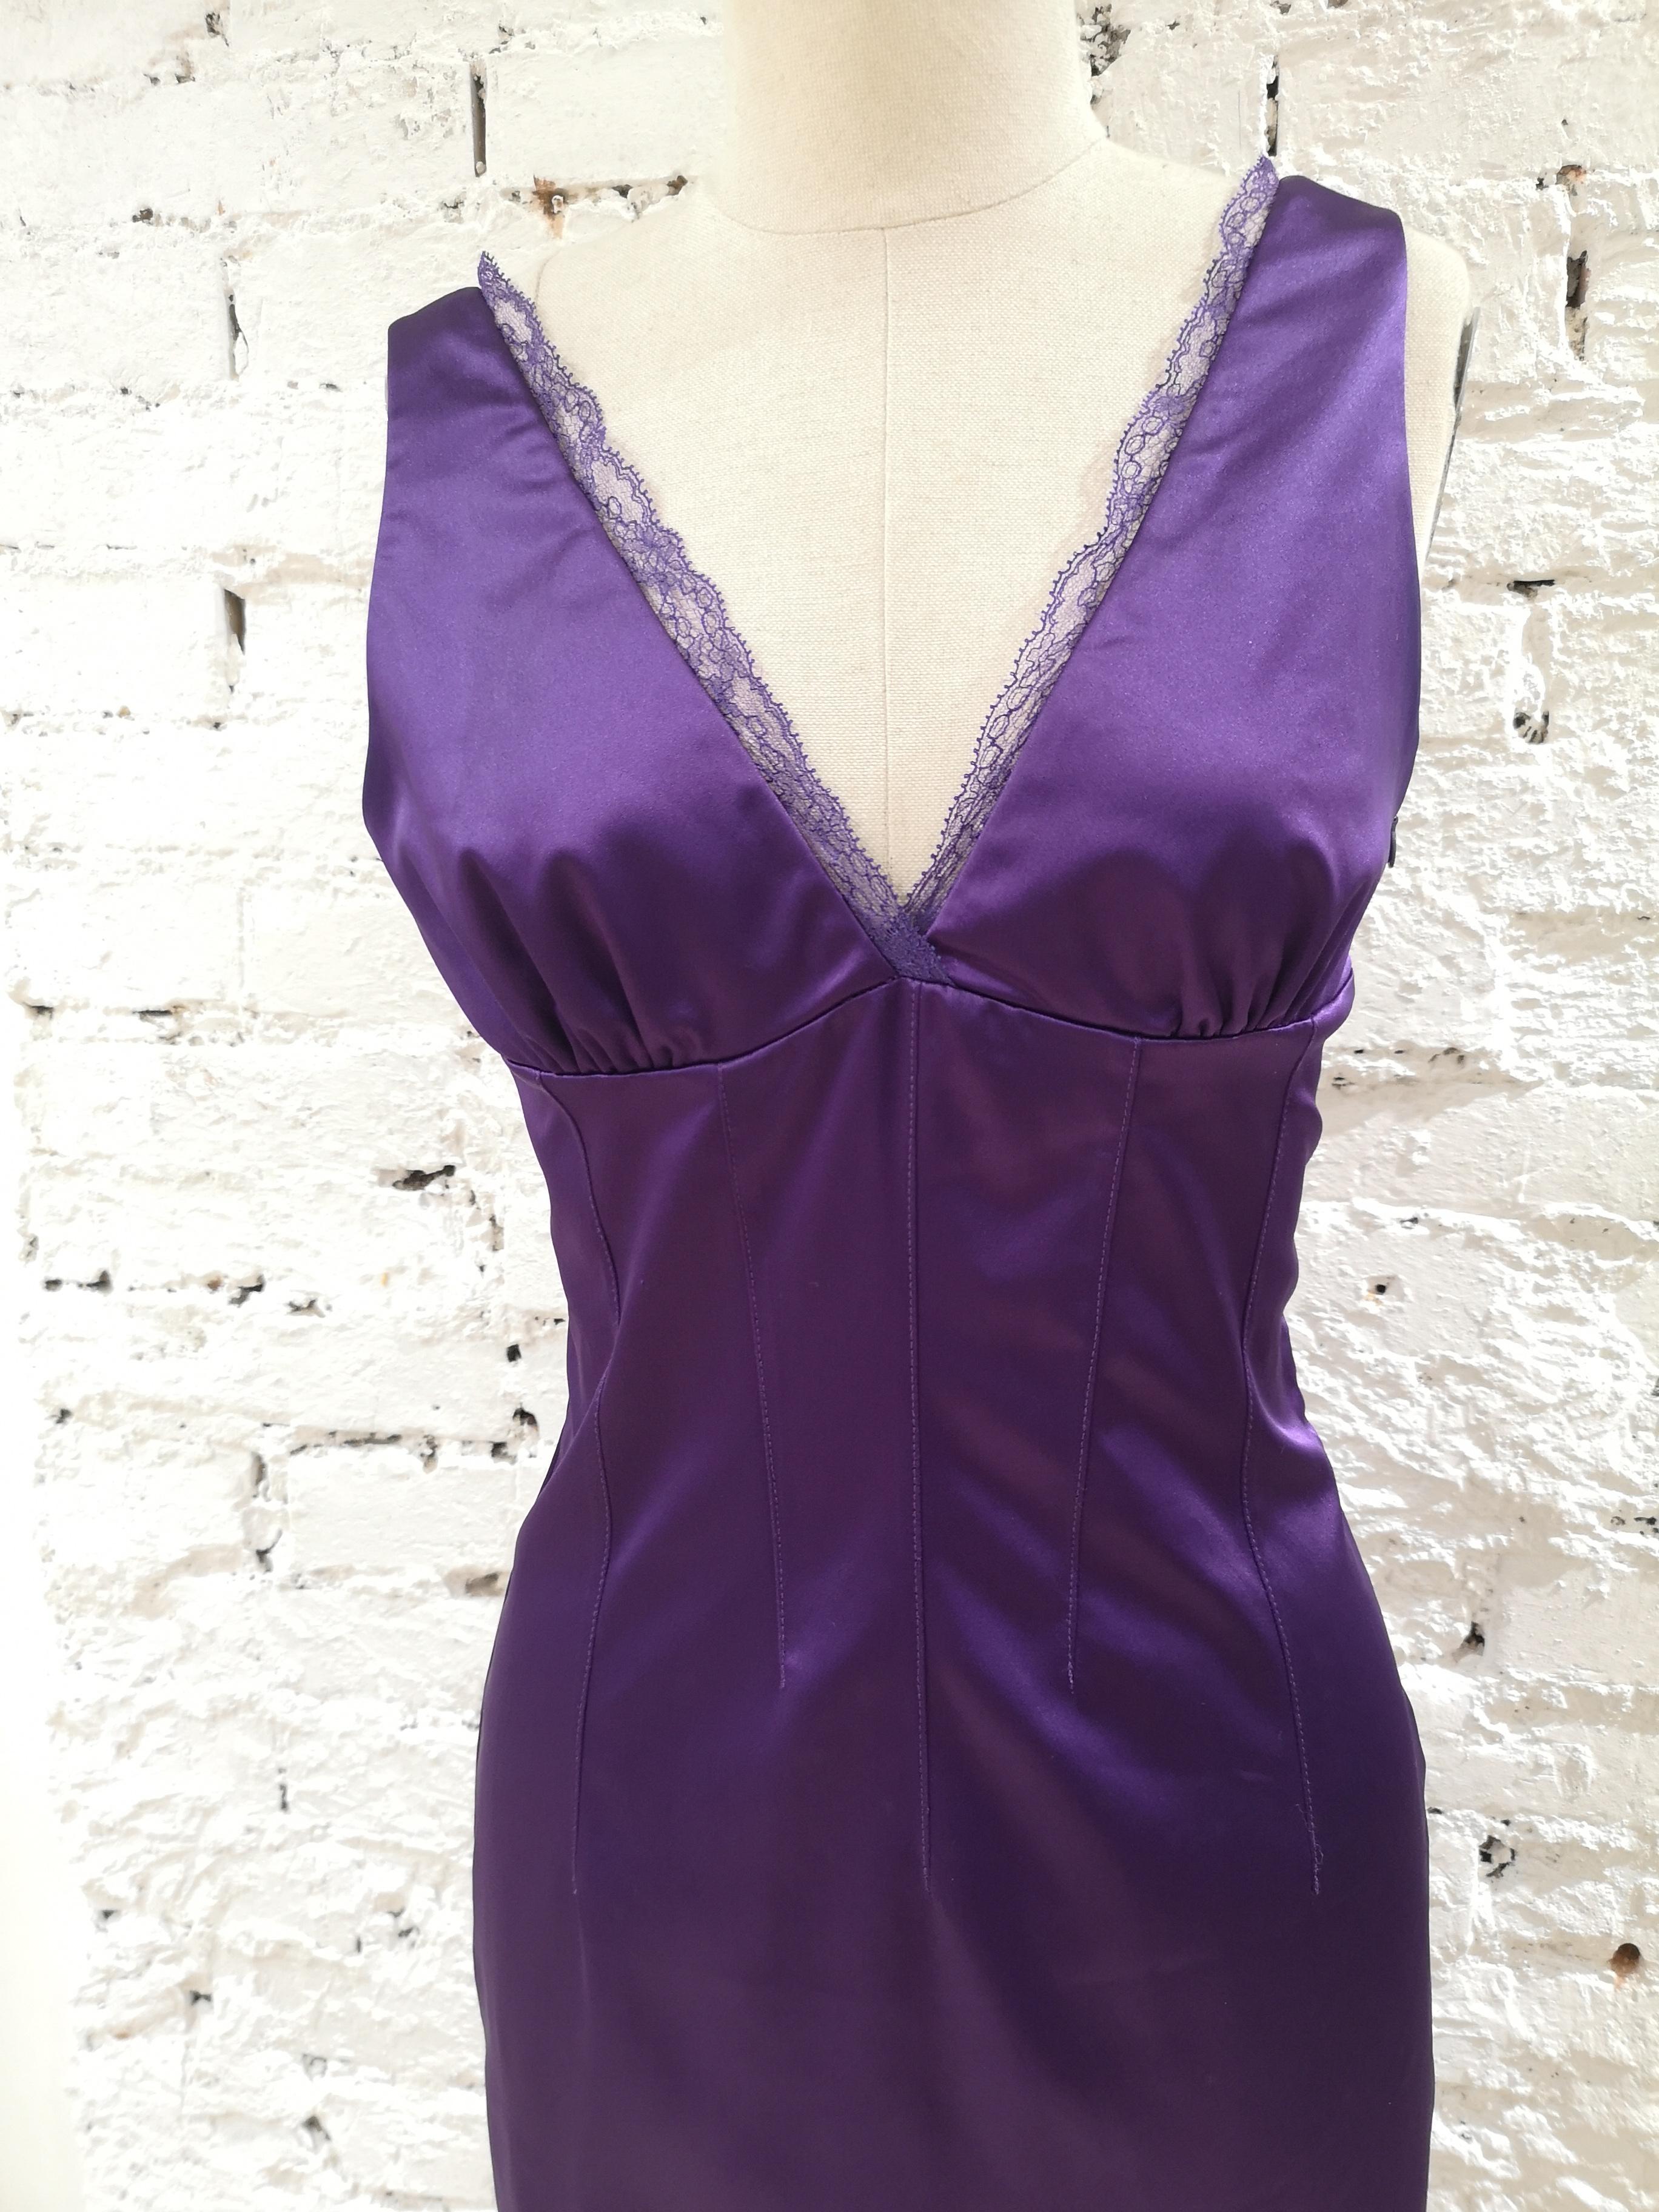 Dolce & Gabbana purple dress
purple dress totally made in italy in size 42
total lenght 102 cm